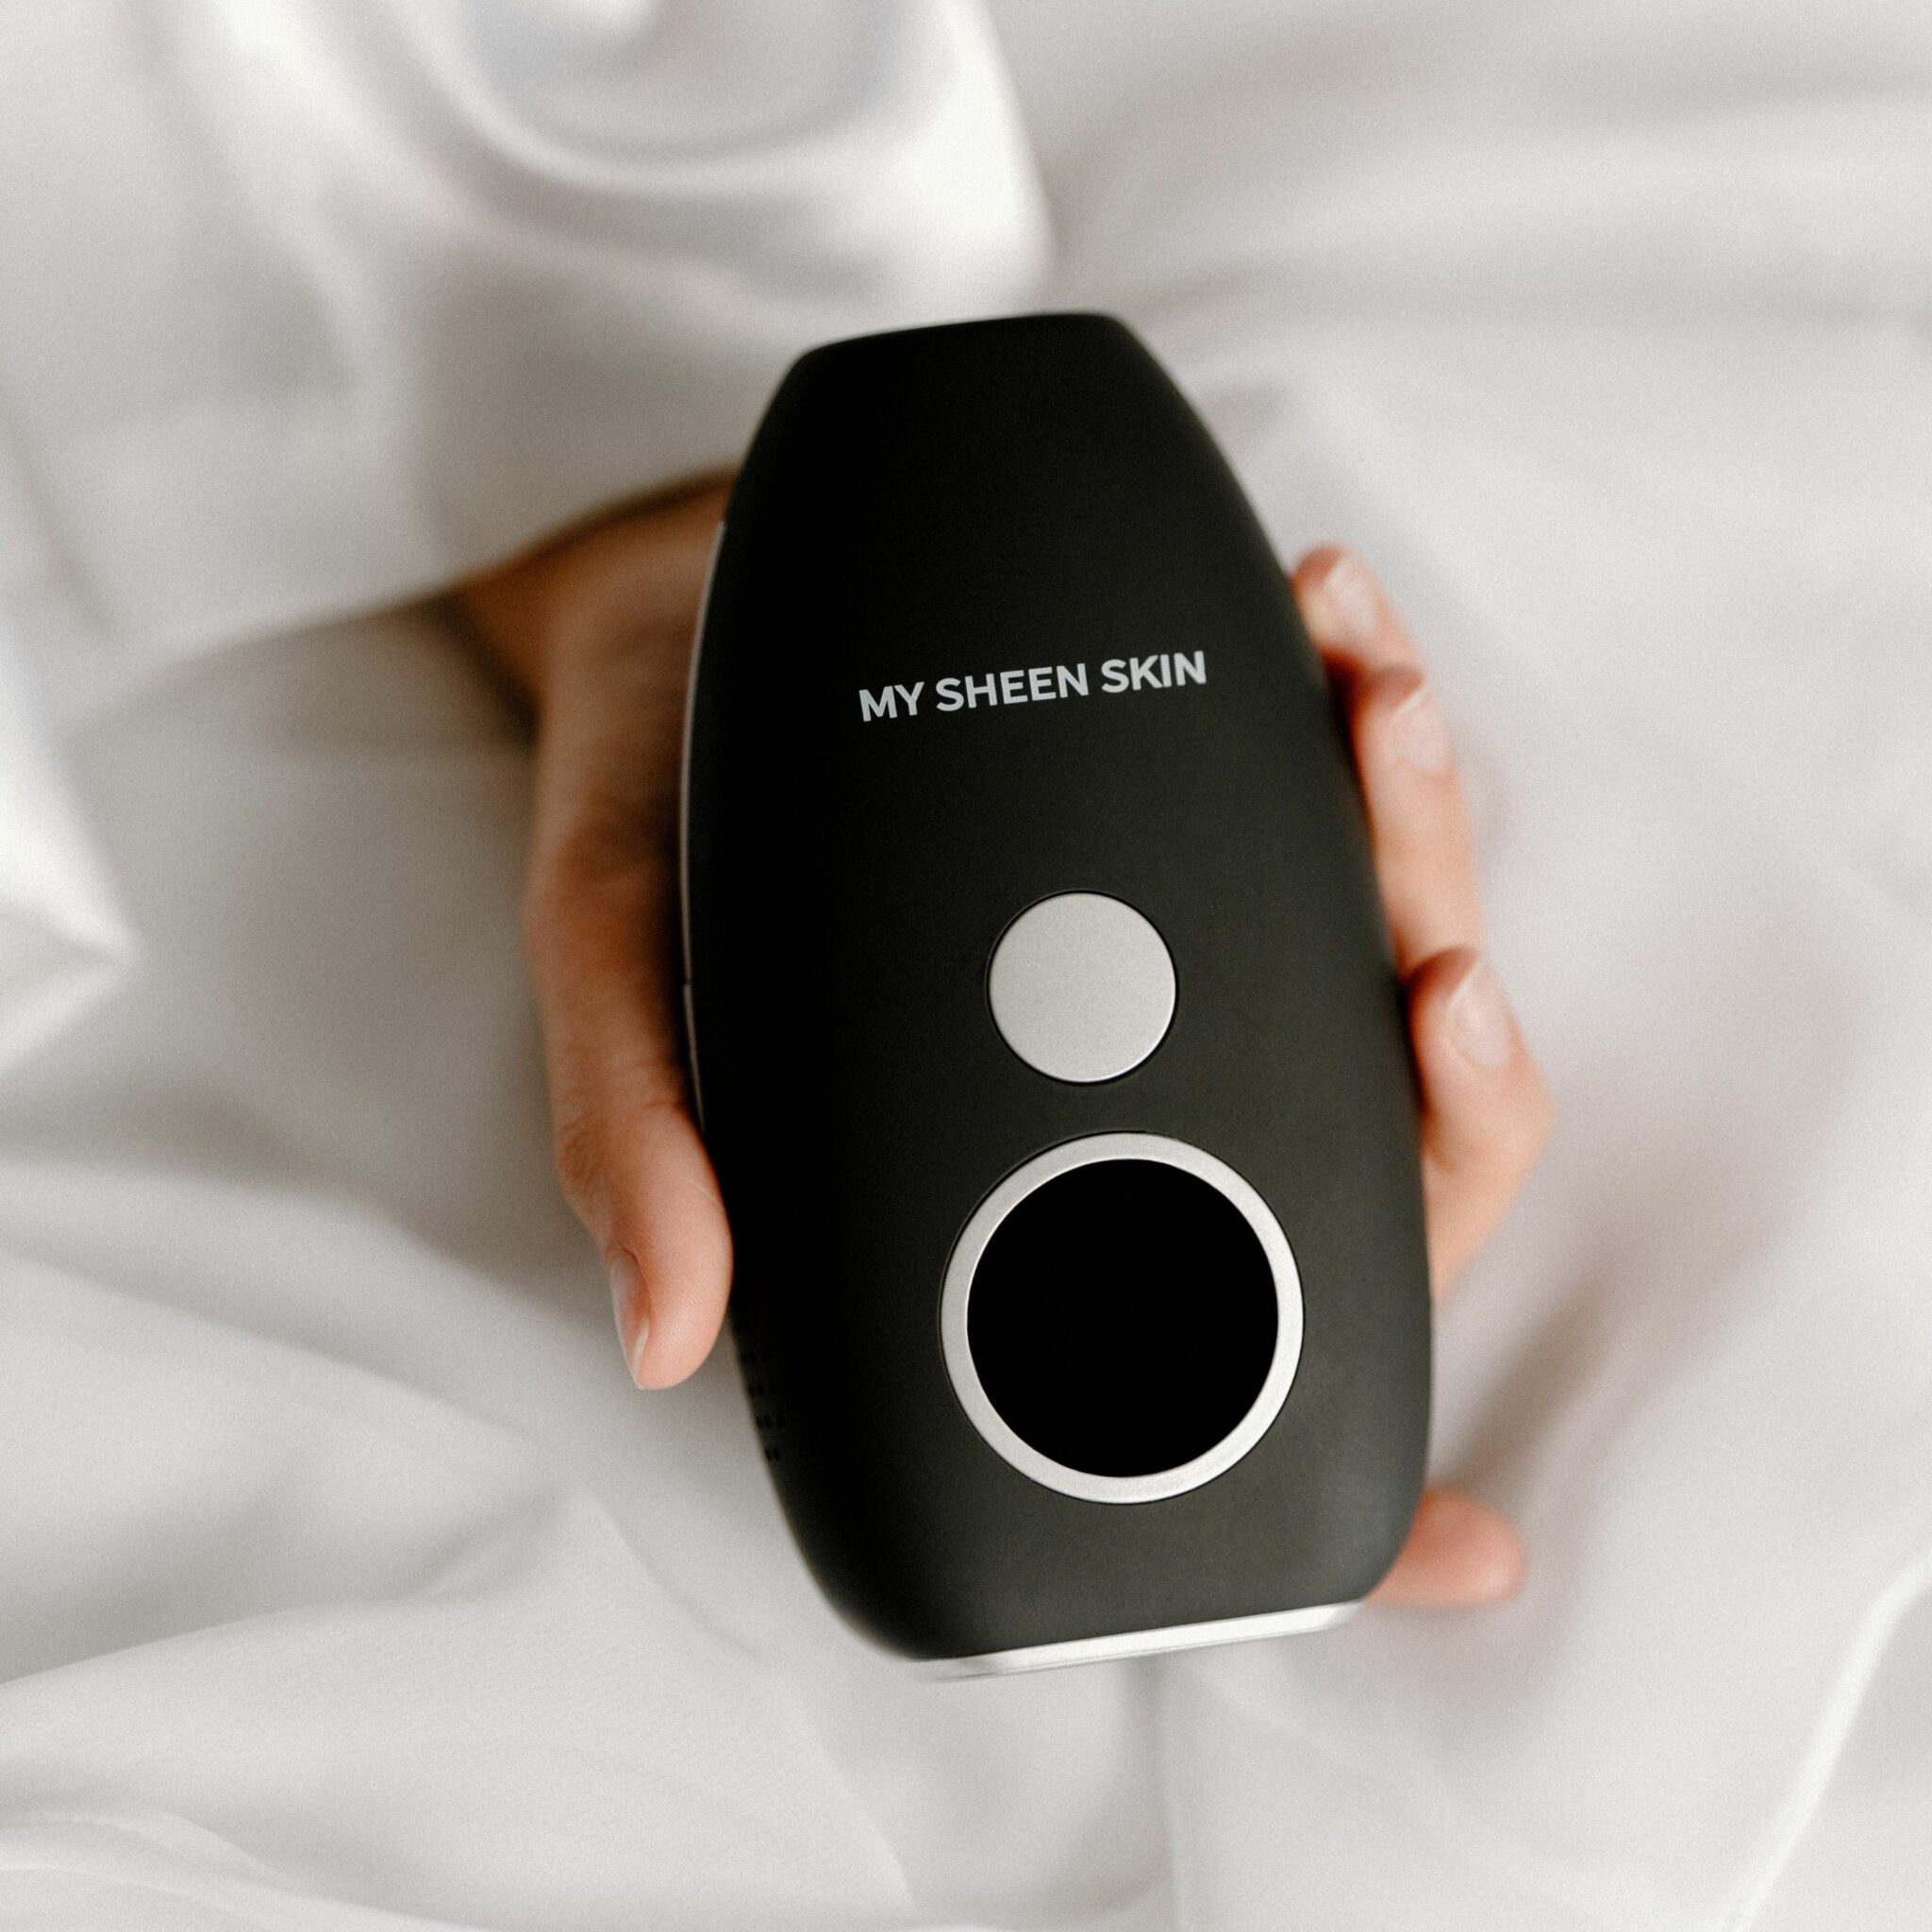 We Tested My Sheen Skin IPL Hair Removal Handset